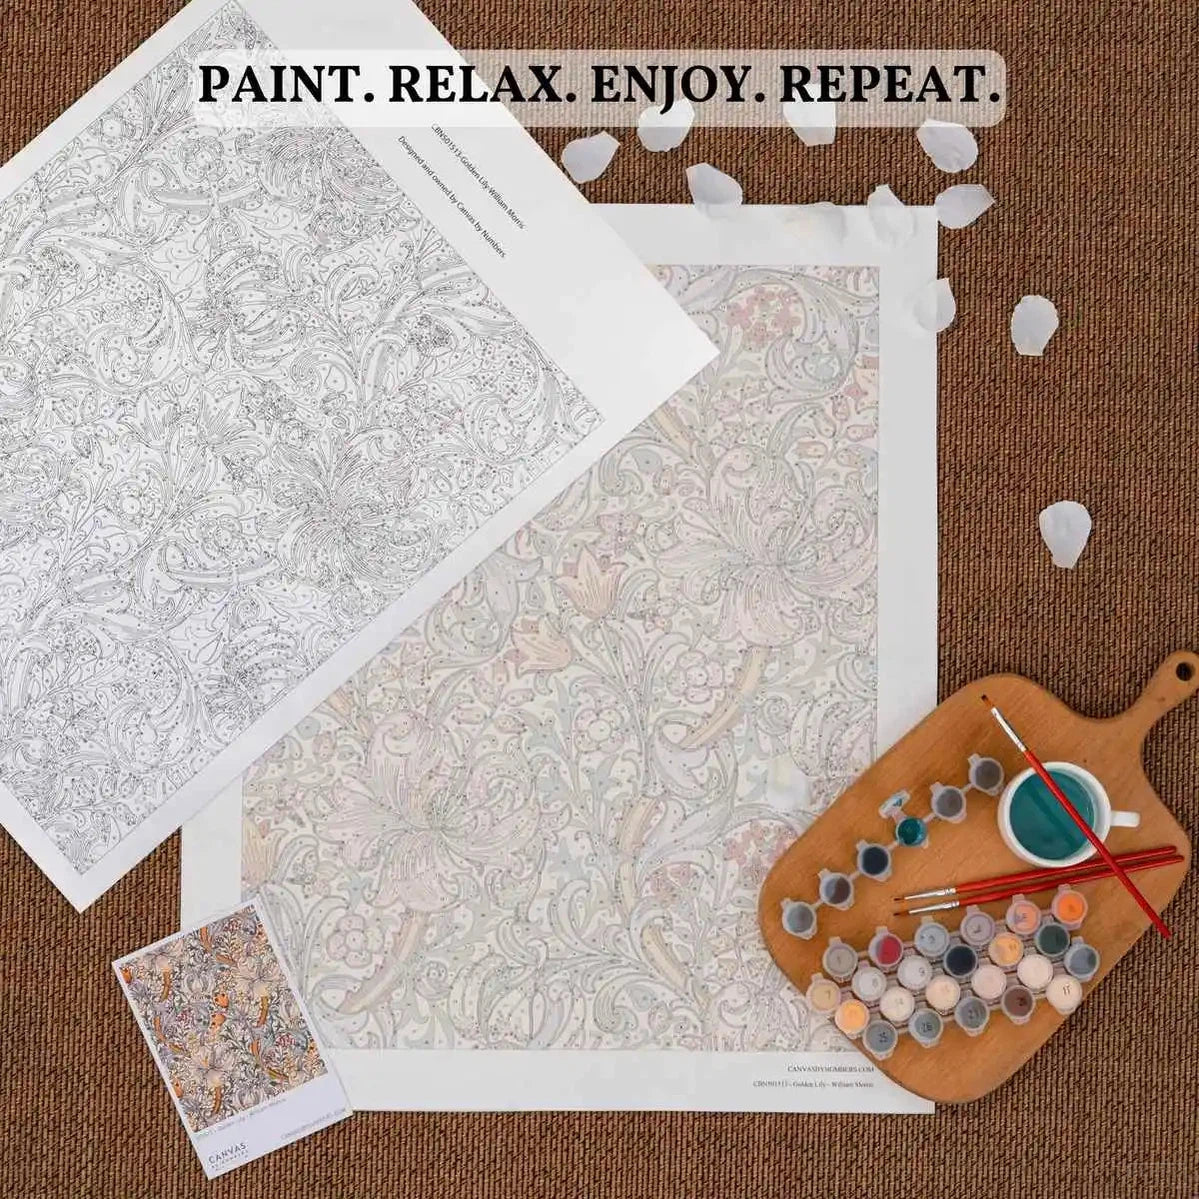 Mata Mua - Paint by Numbers-You'll love our Mata Mua - Paul Gauguin paint by numbers kit. Shop more than 500 paintings at Canvas by Numbers. Up to 50% Off! Free shipping and 60 days money-back.-Canvas by Numbers